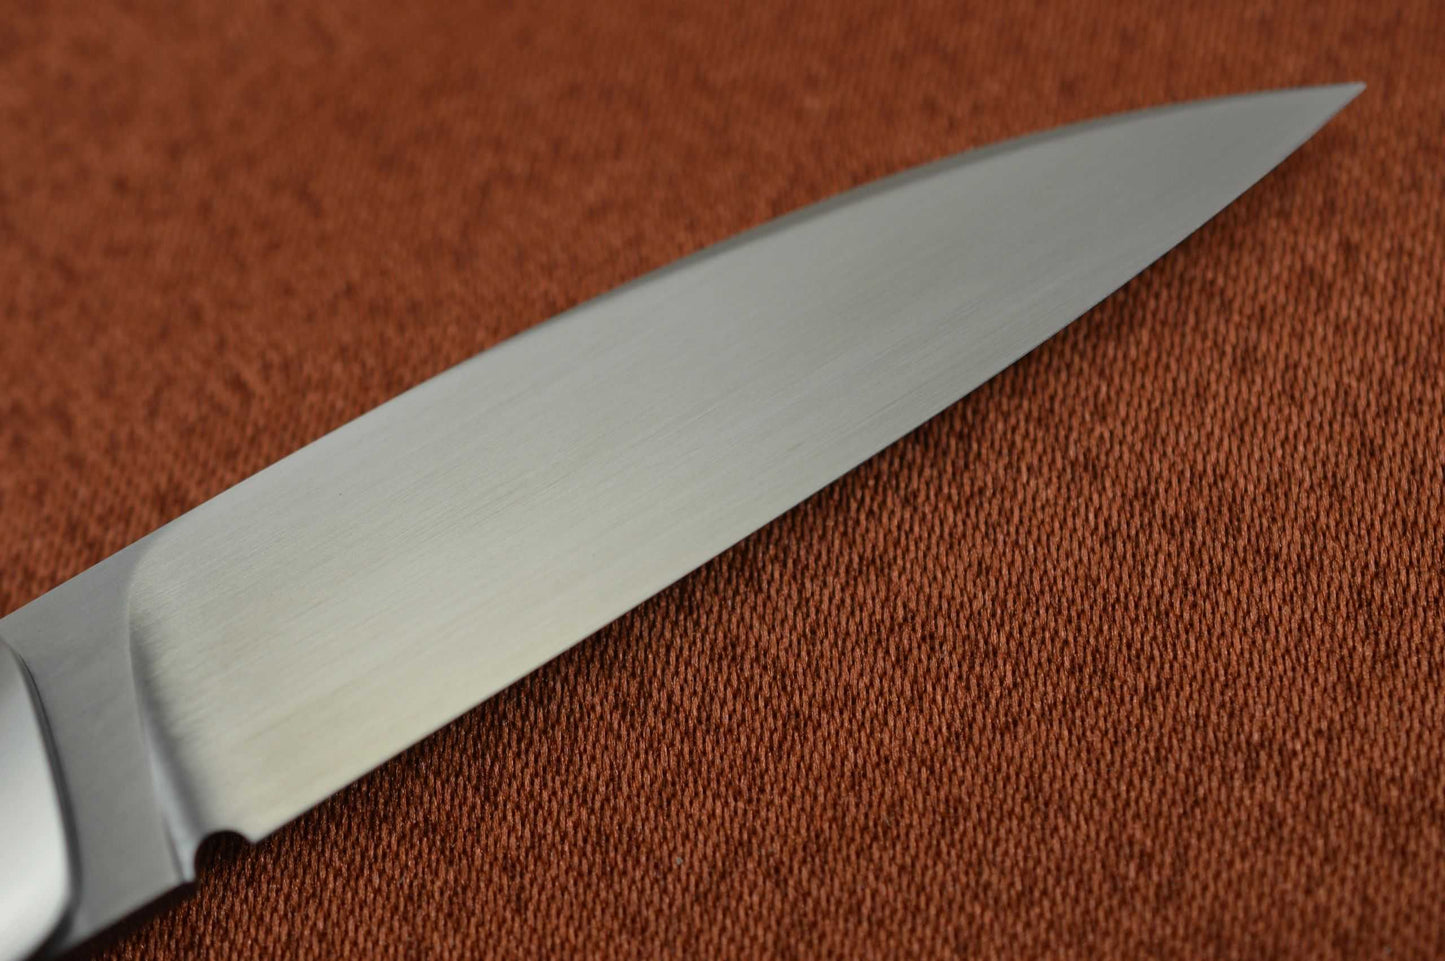 Jack Busfield Mother of Pearl Lock-Back Wharncliffe Folder